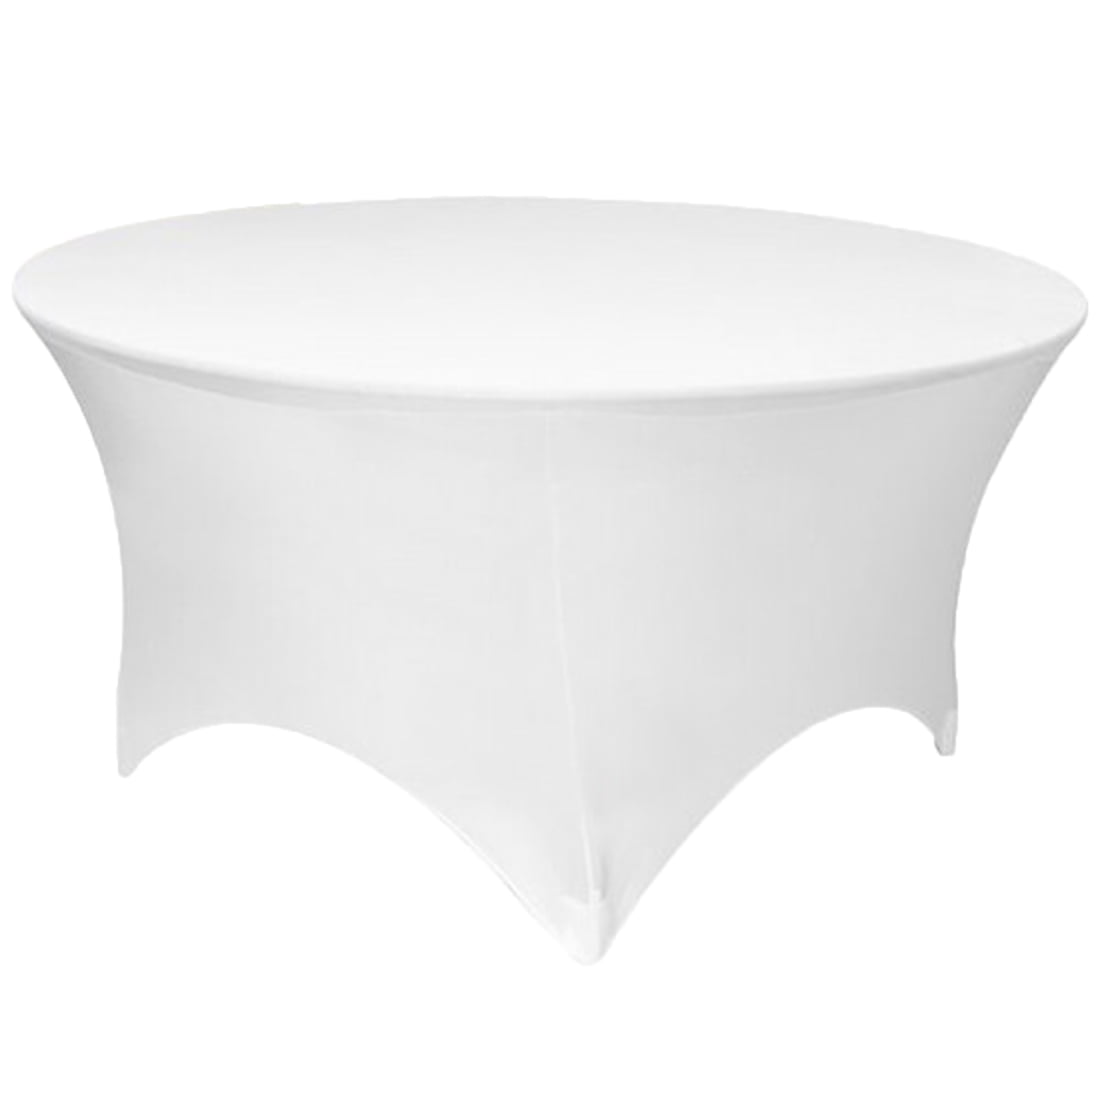 Gowinex White 6 Ft Round Spandex, Spandex Round Table Covers 6ft